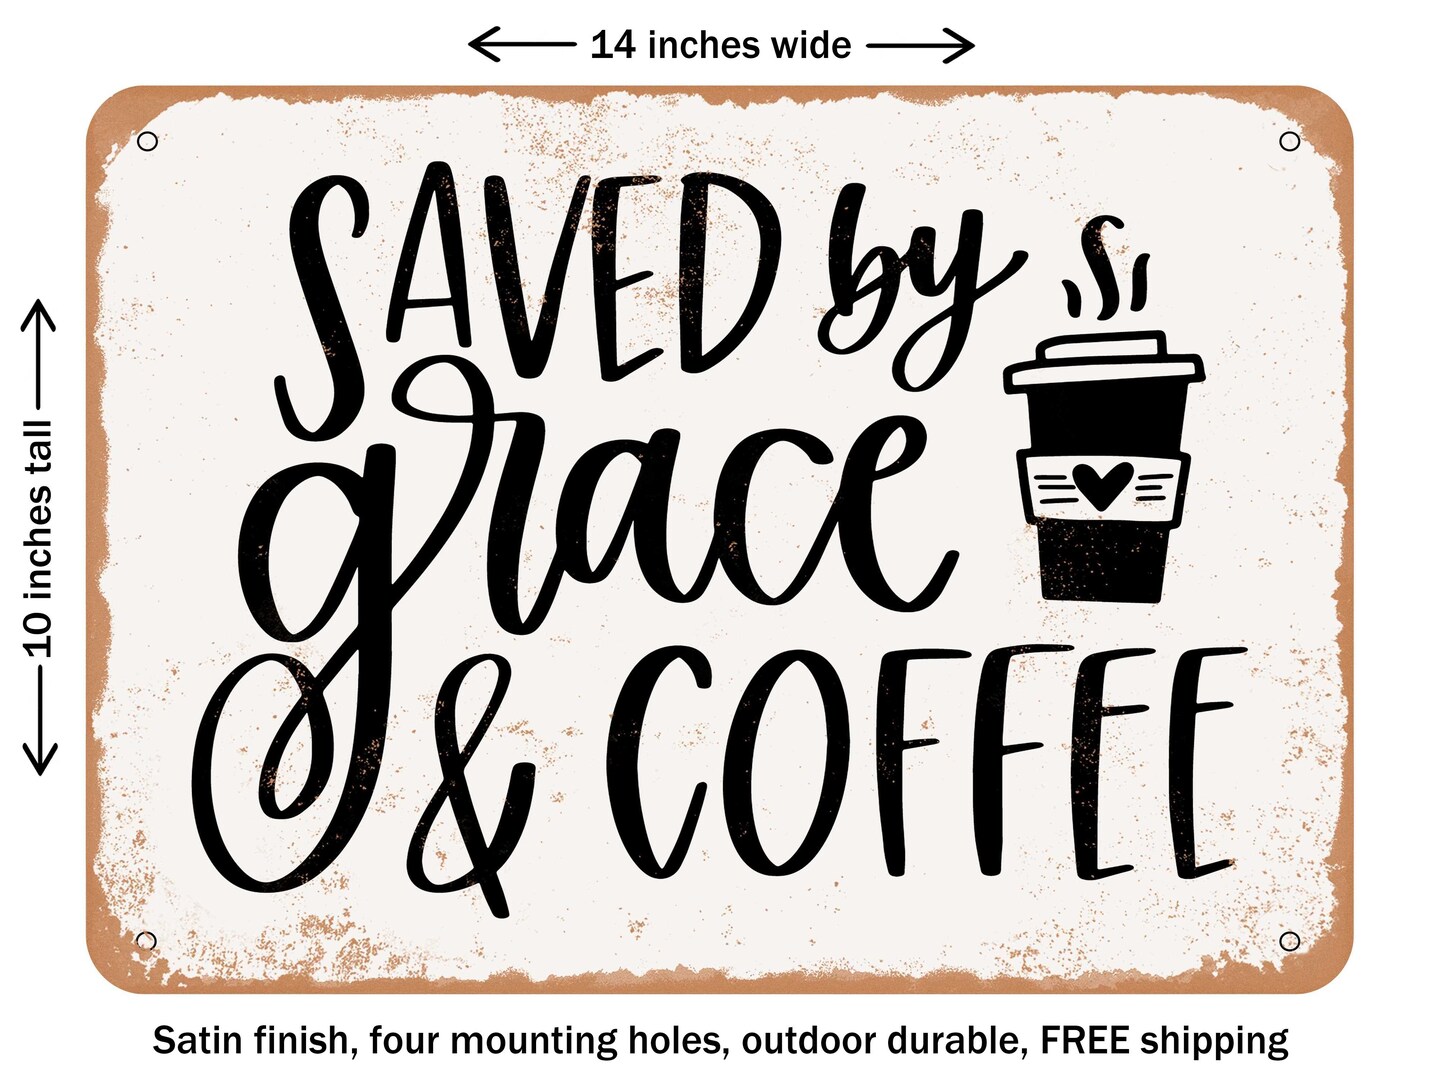 DECORATIVE METAL SIGN - Saved by Grace and Coffee - Vintage Rusty Look